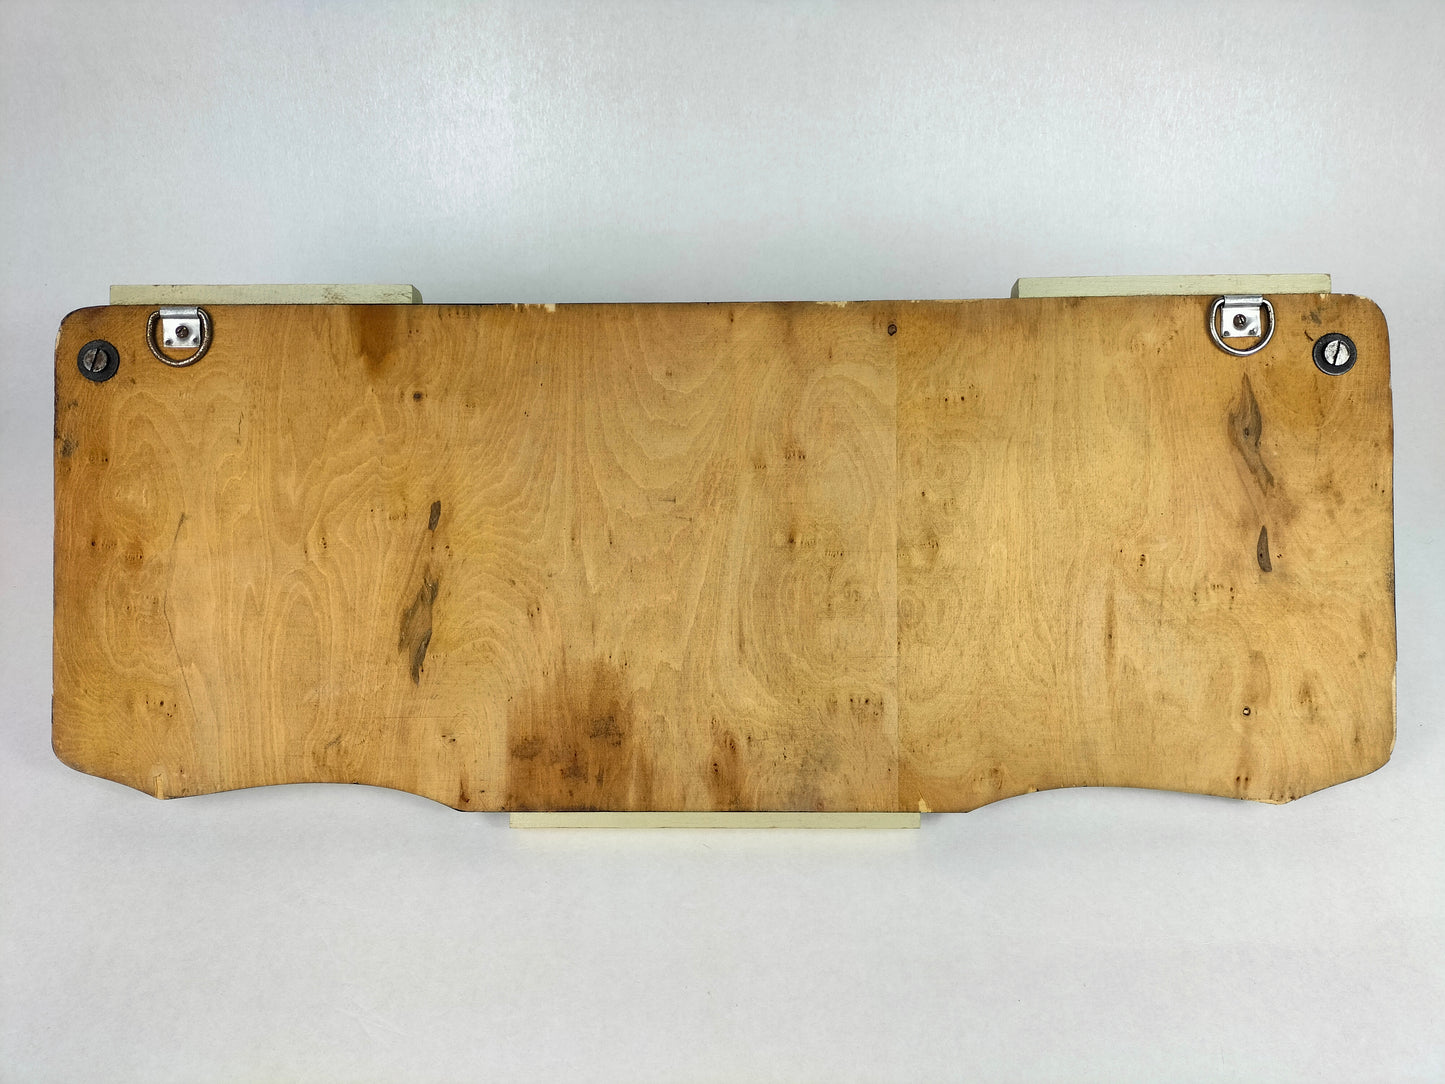 Vintage wooden wall mounted coat rack with mirror // Mid 20th century